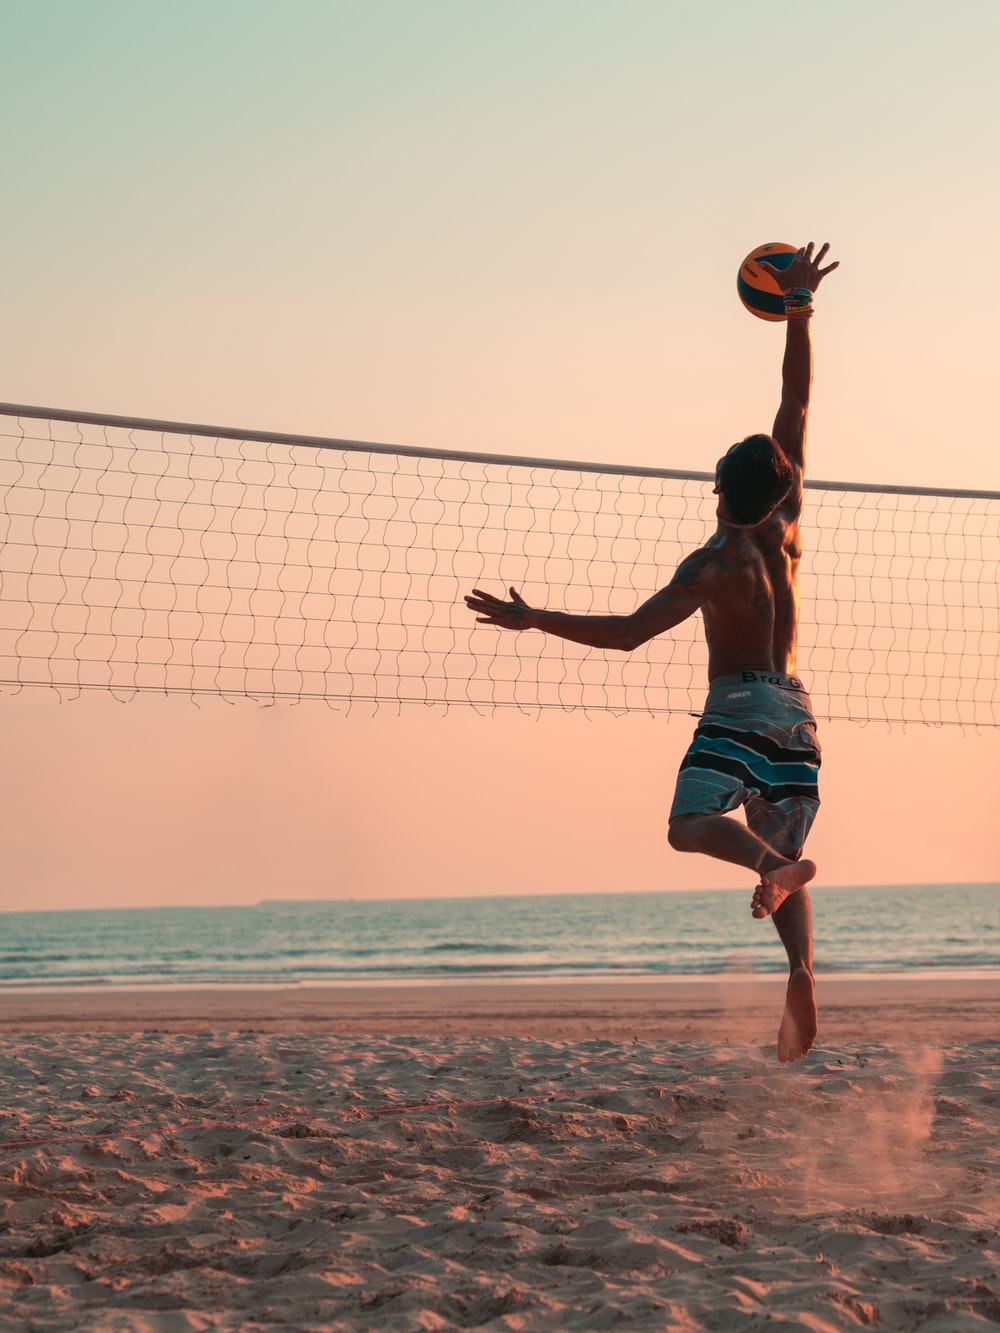 Volleyball Picture. Download Free Image